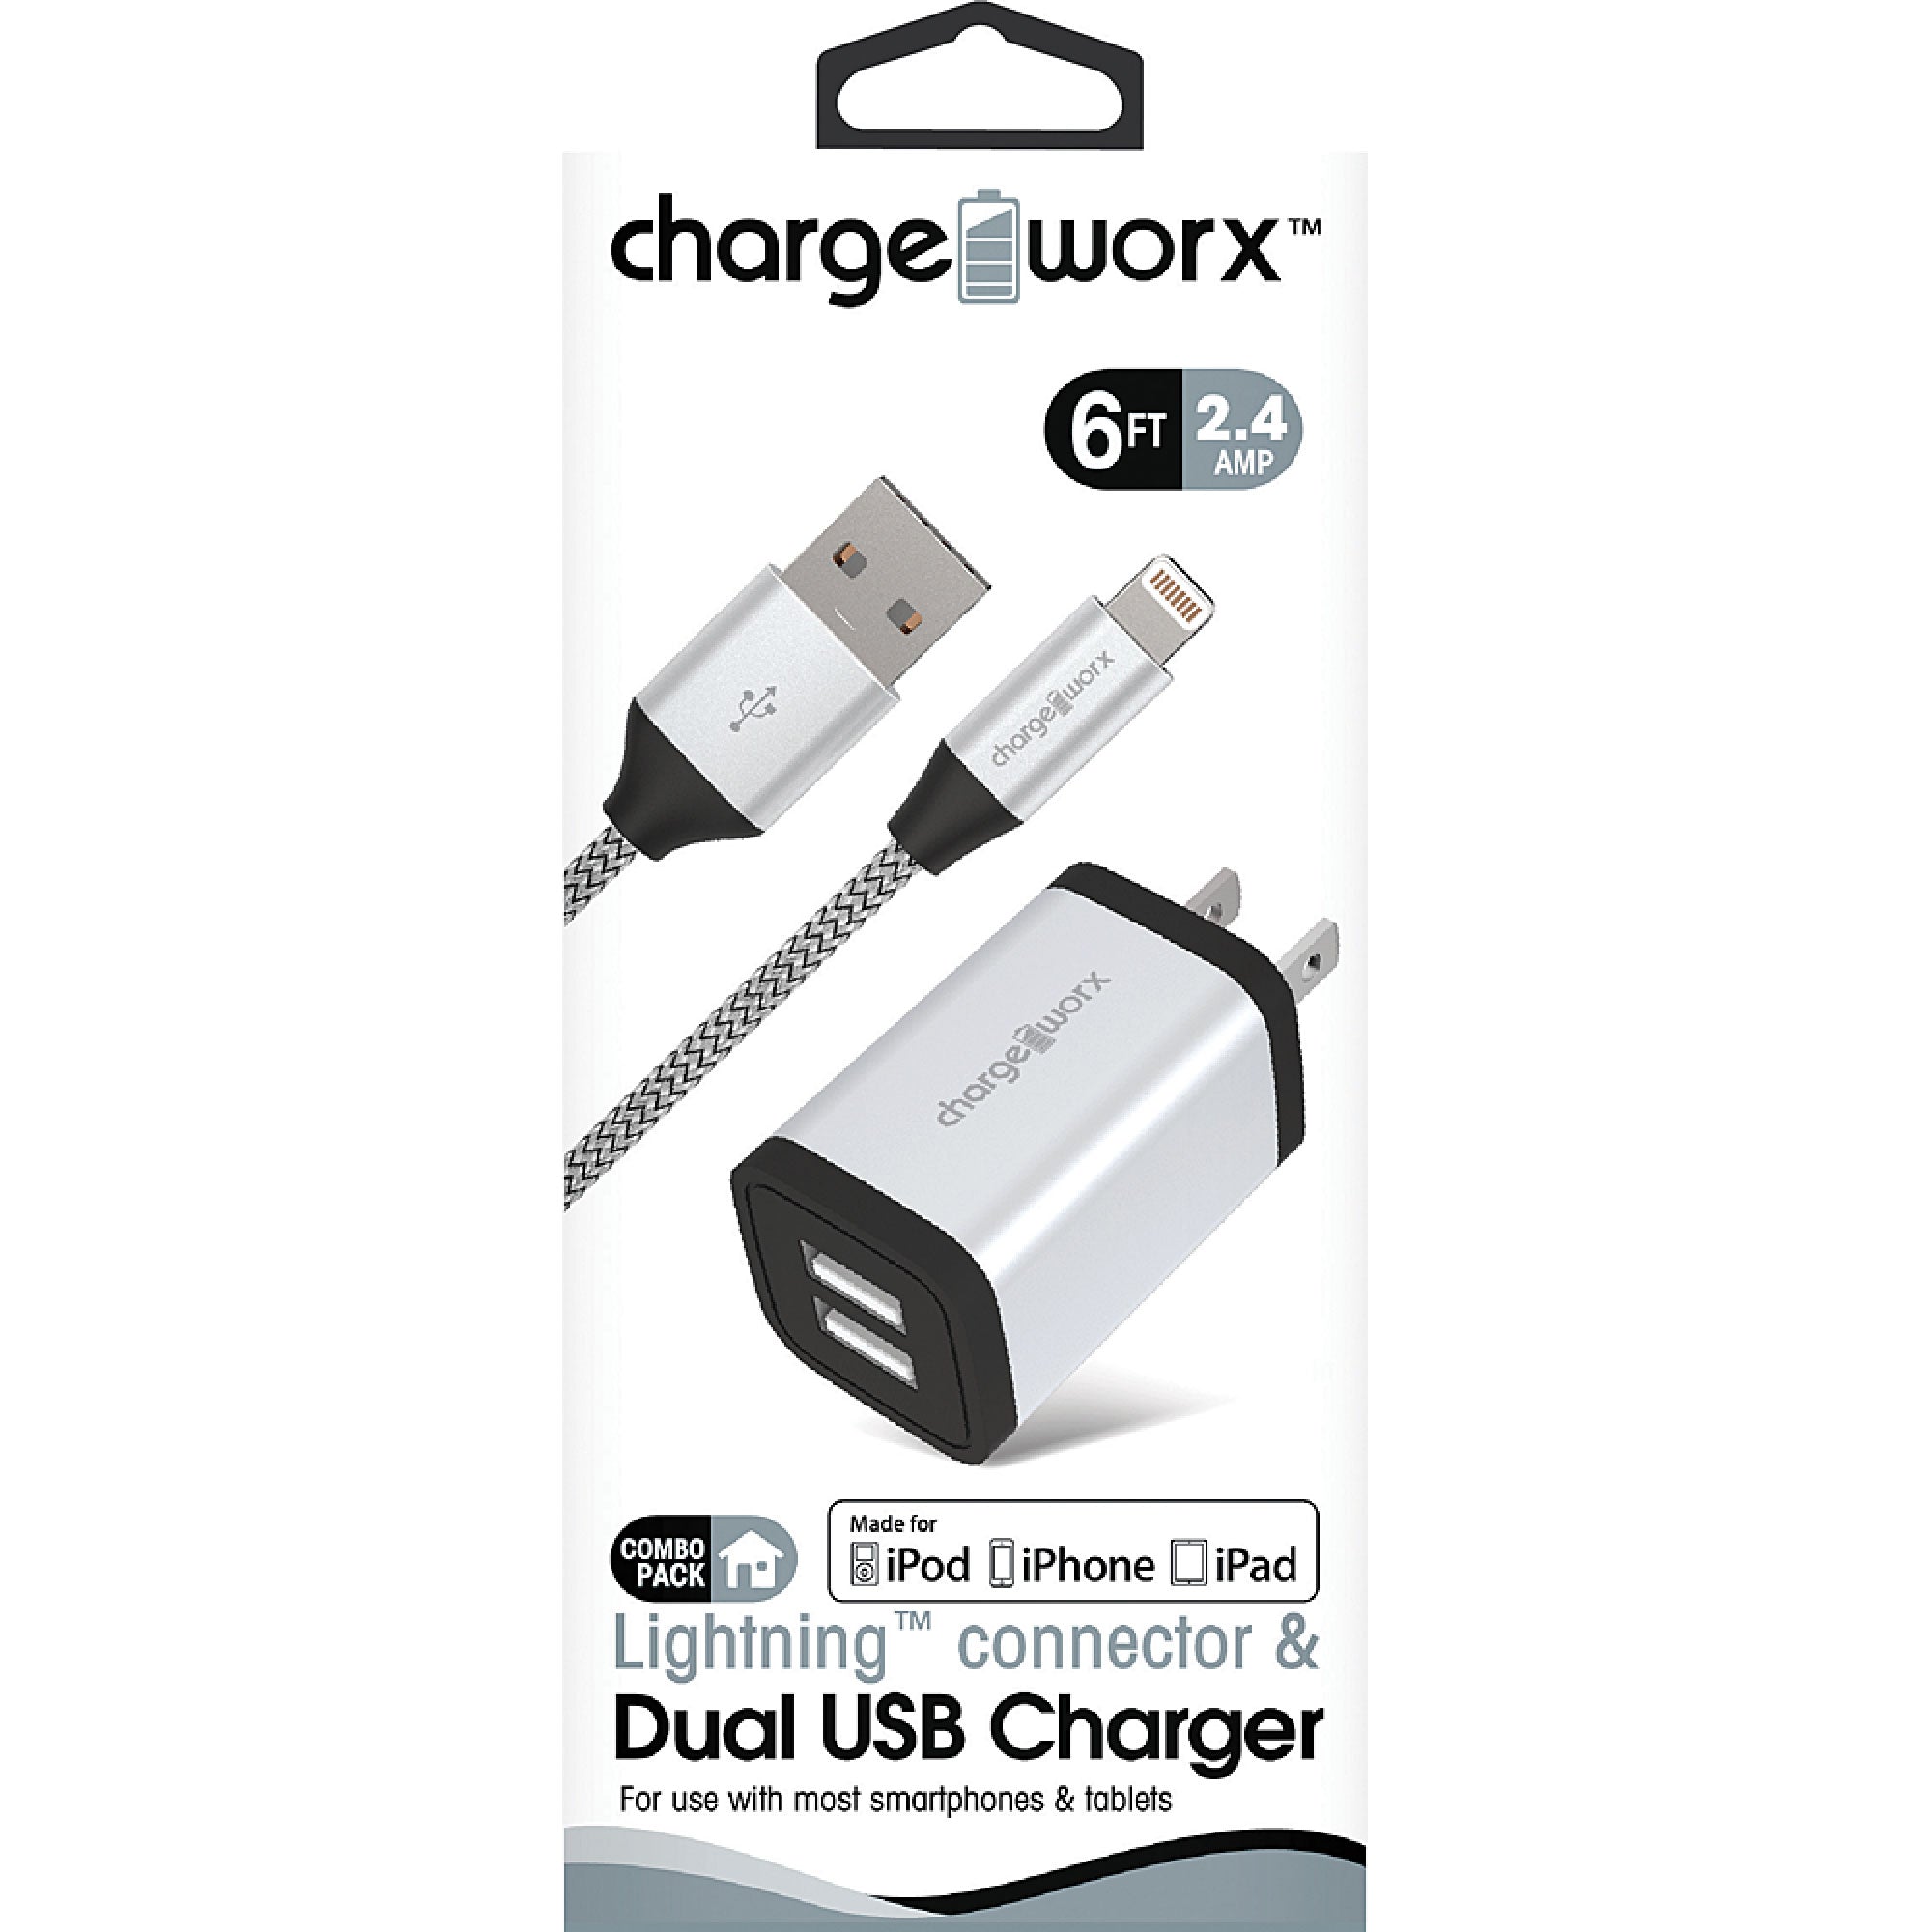 Chargeworx 2.4A Dual USB Metal Wall Charger & 6ft Lightning Cable